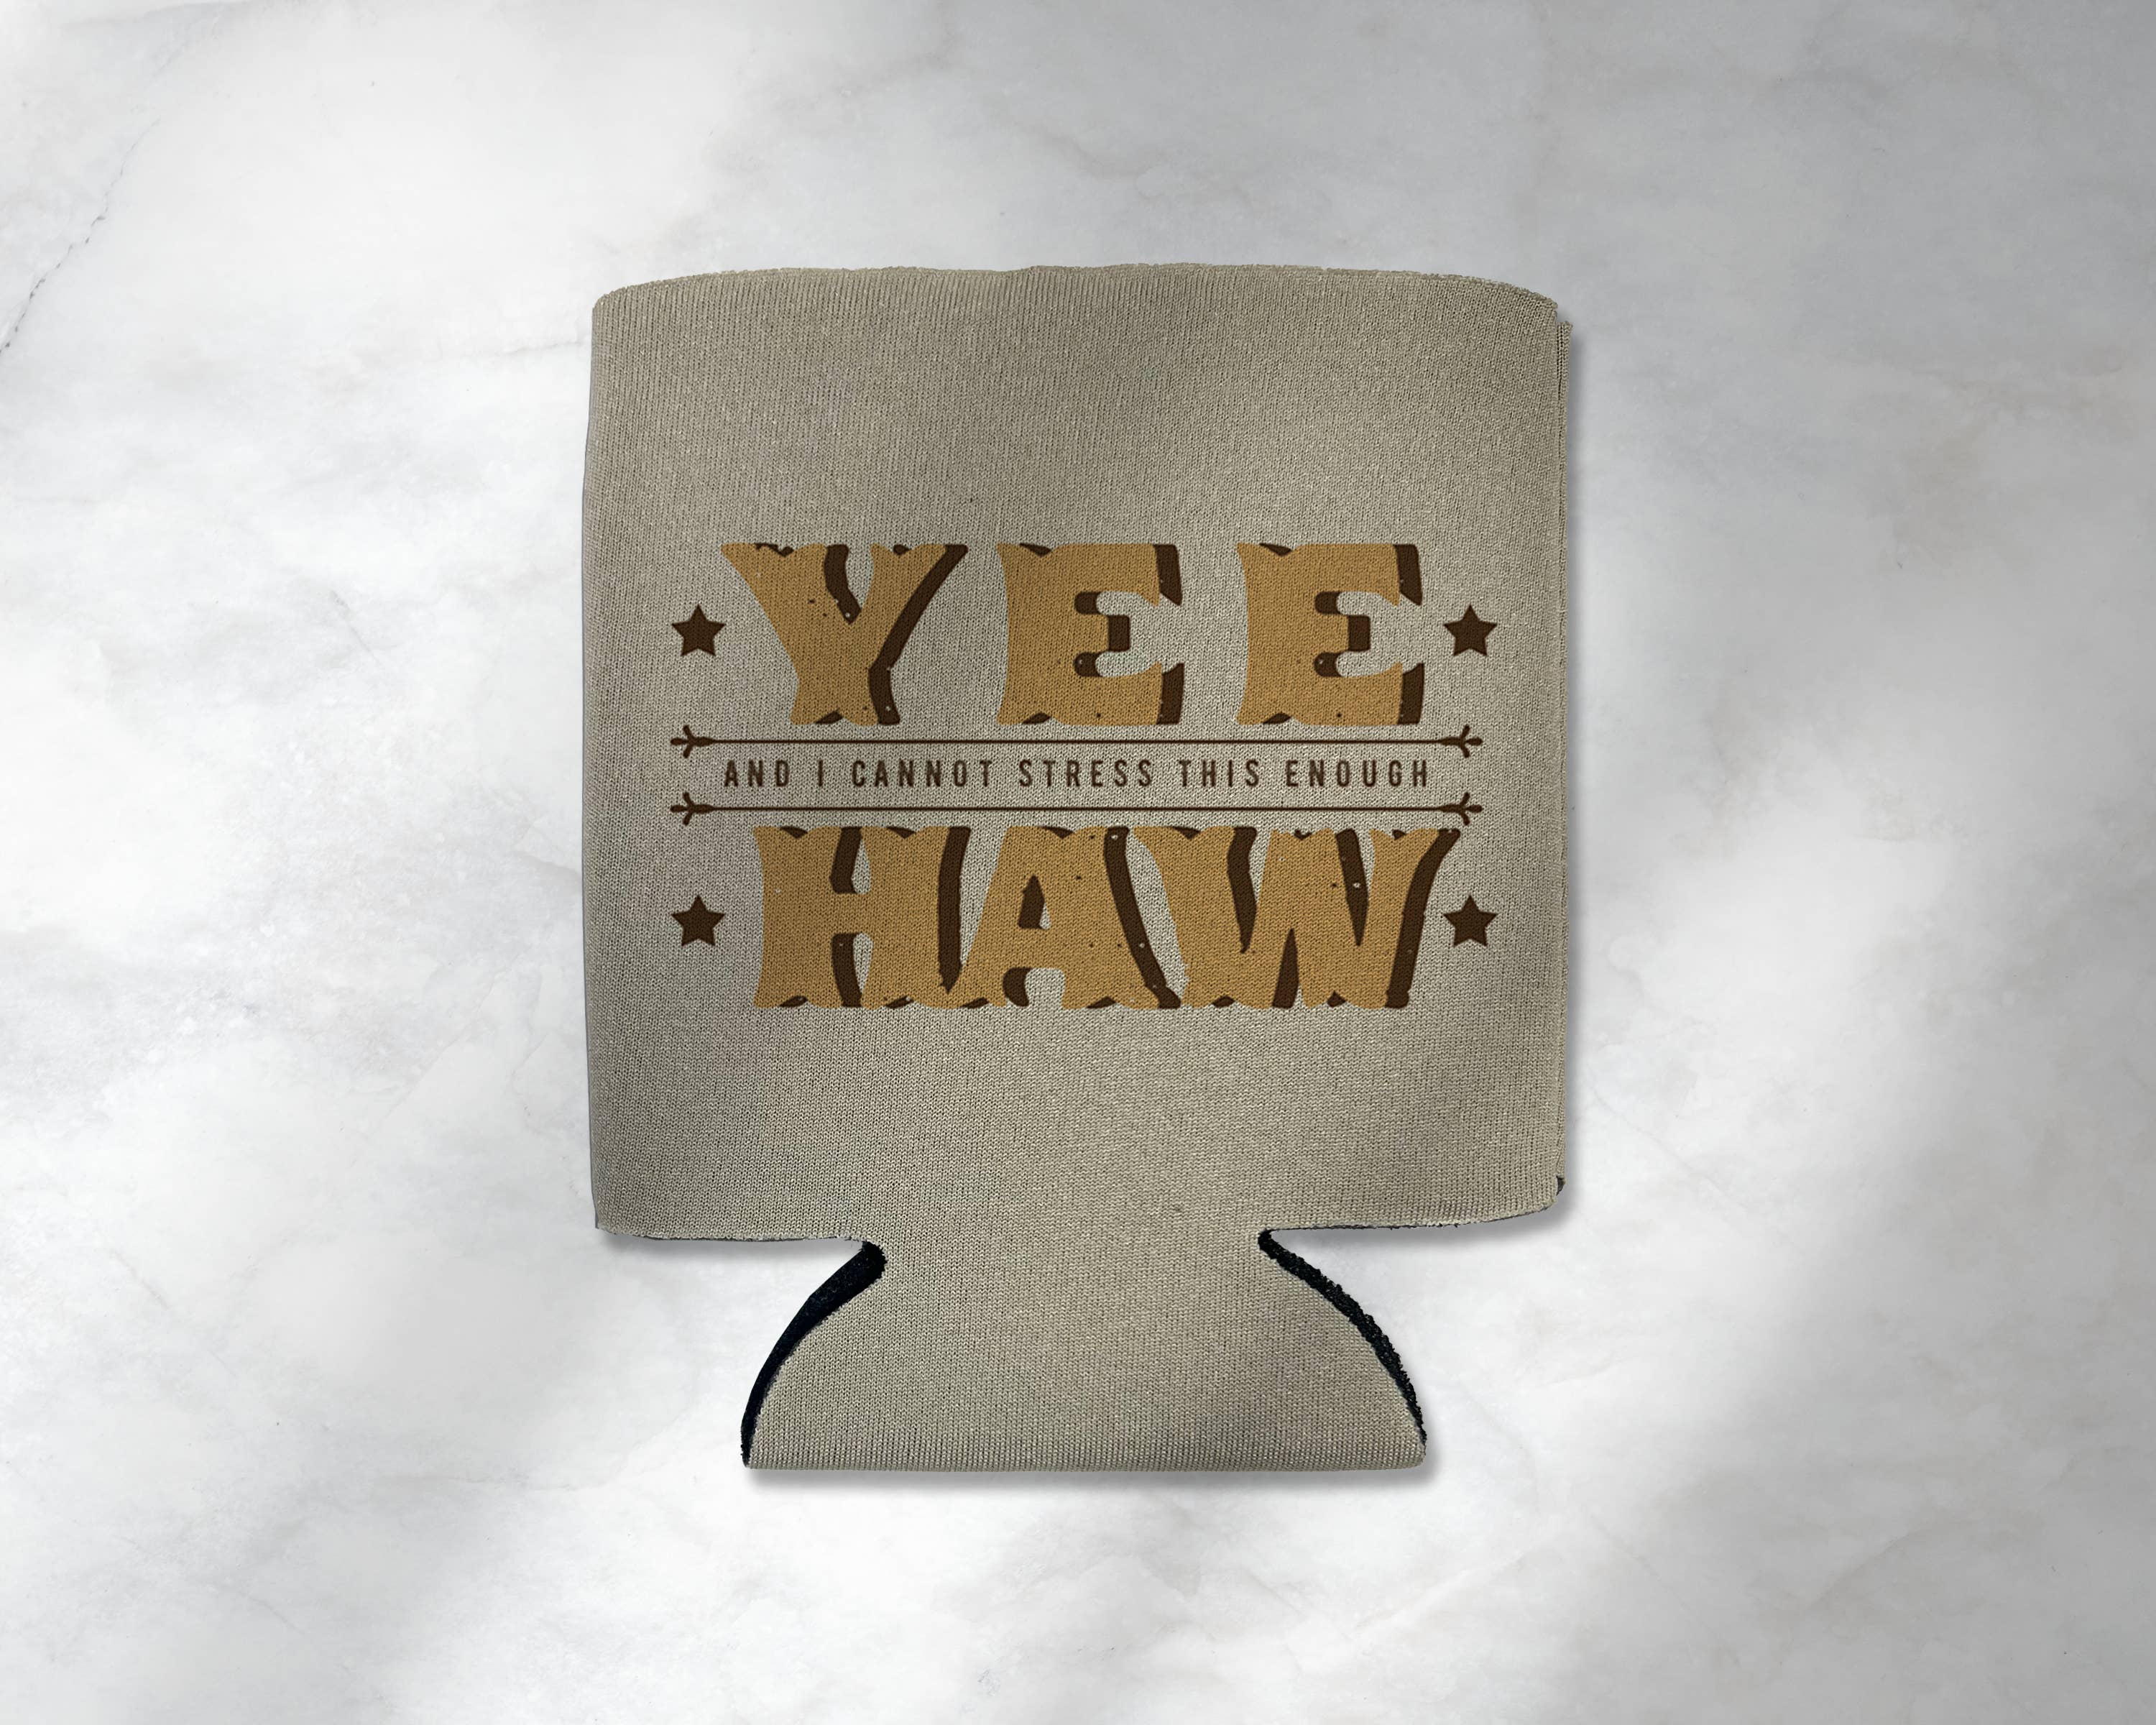 Cluster Funk Studio - Yes and I Cannot Stress This Enough Haw Koozie